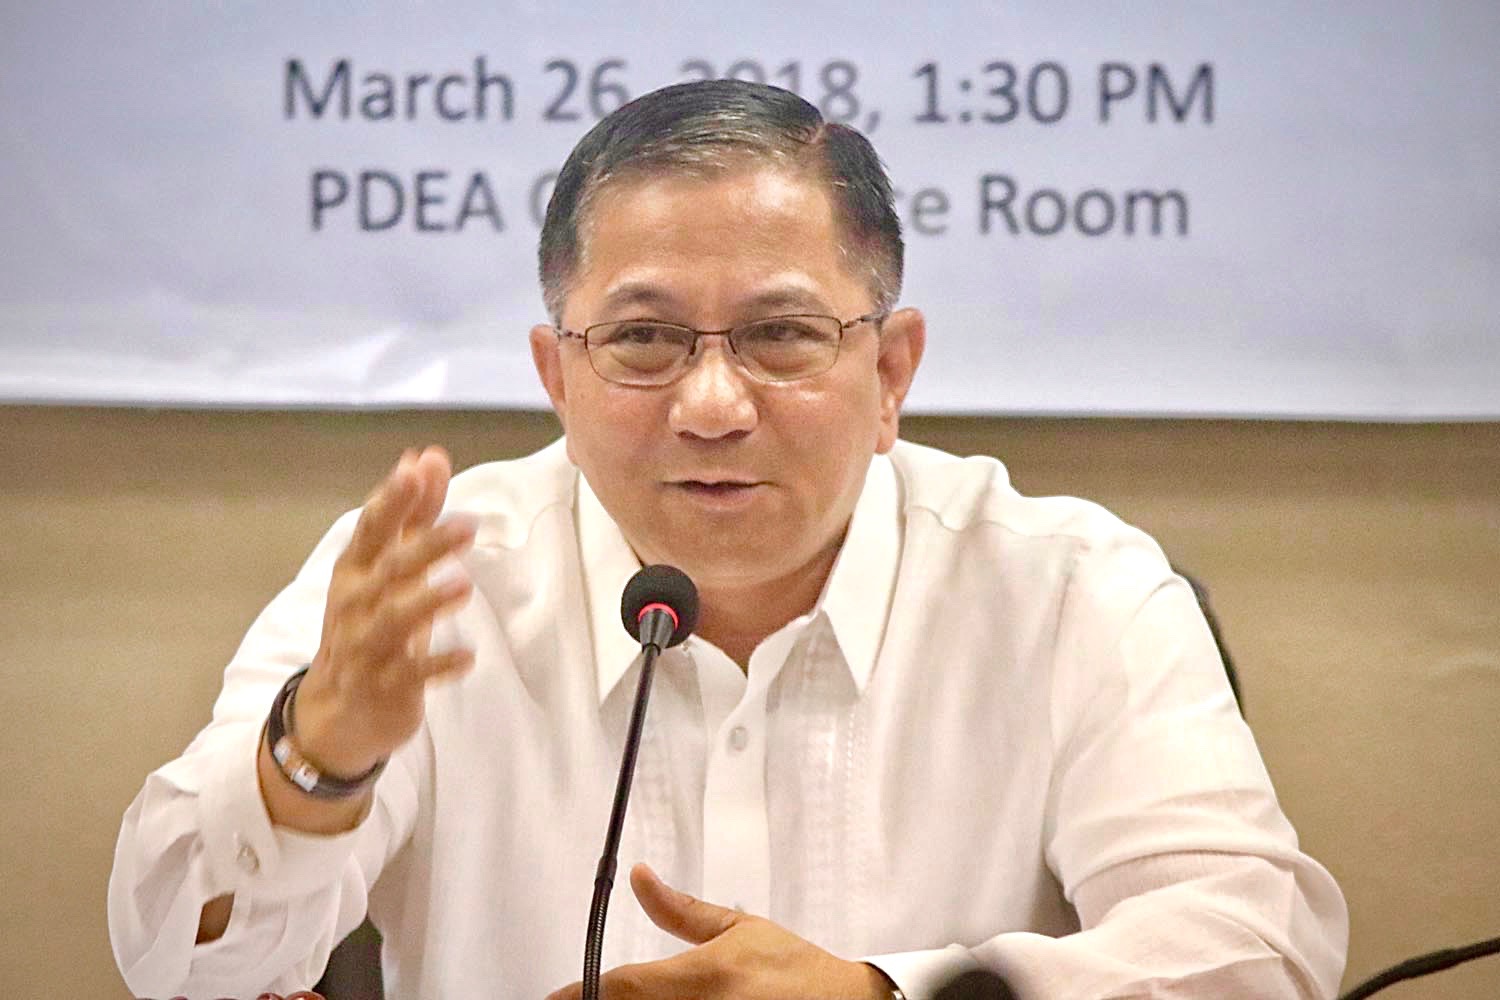 PDEA CHIEF. Aaron Aquino leads the release of the barangay drug list at the PDEA headquarters in Quezon City. File photo by Darren Langit/Rappler  